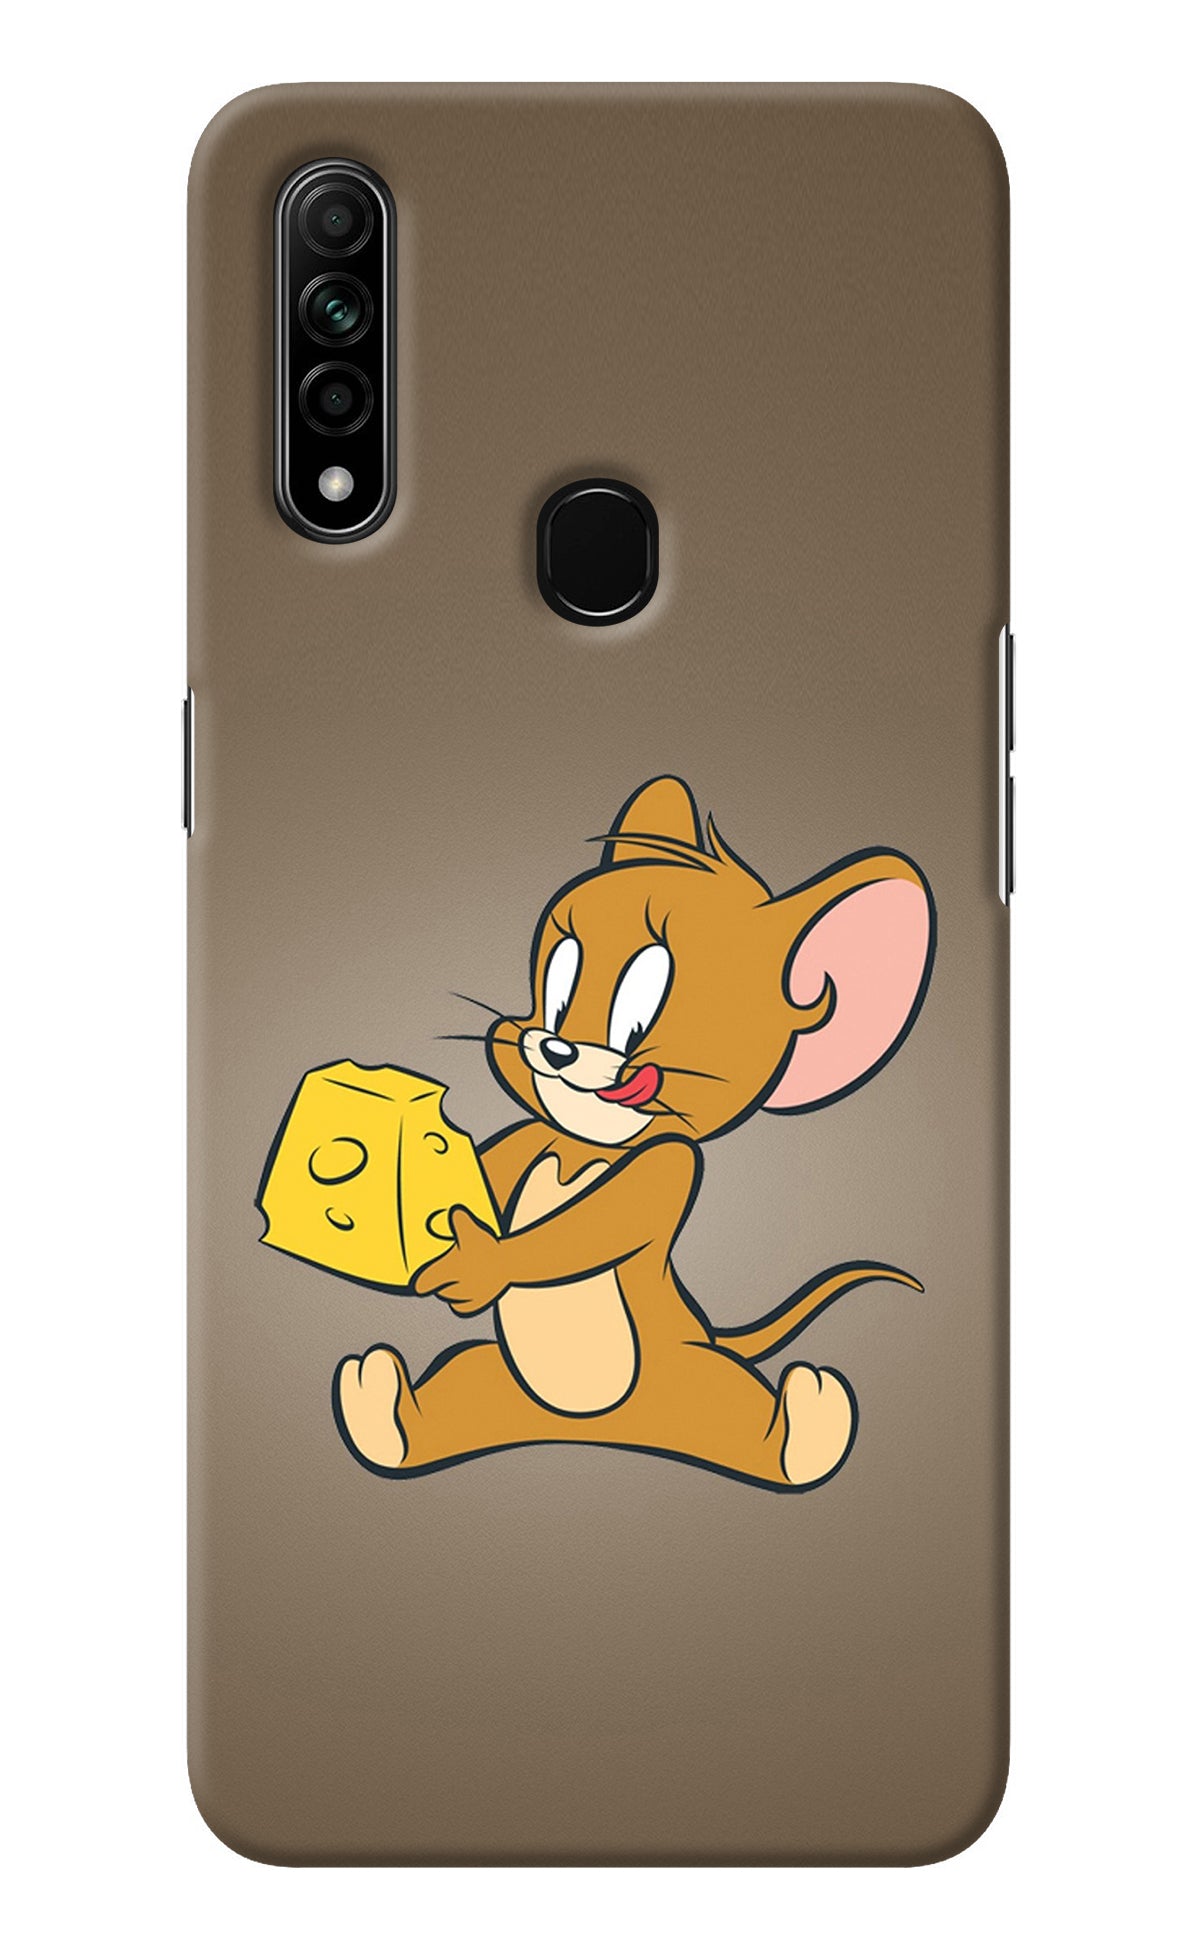 Jerry Oppo A31 Back Cover